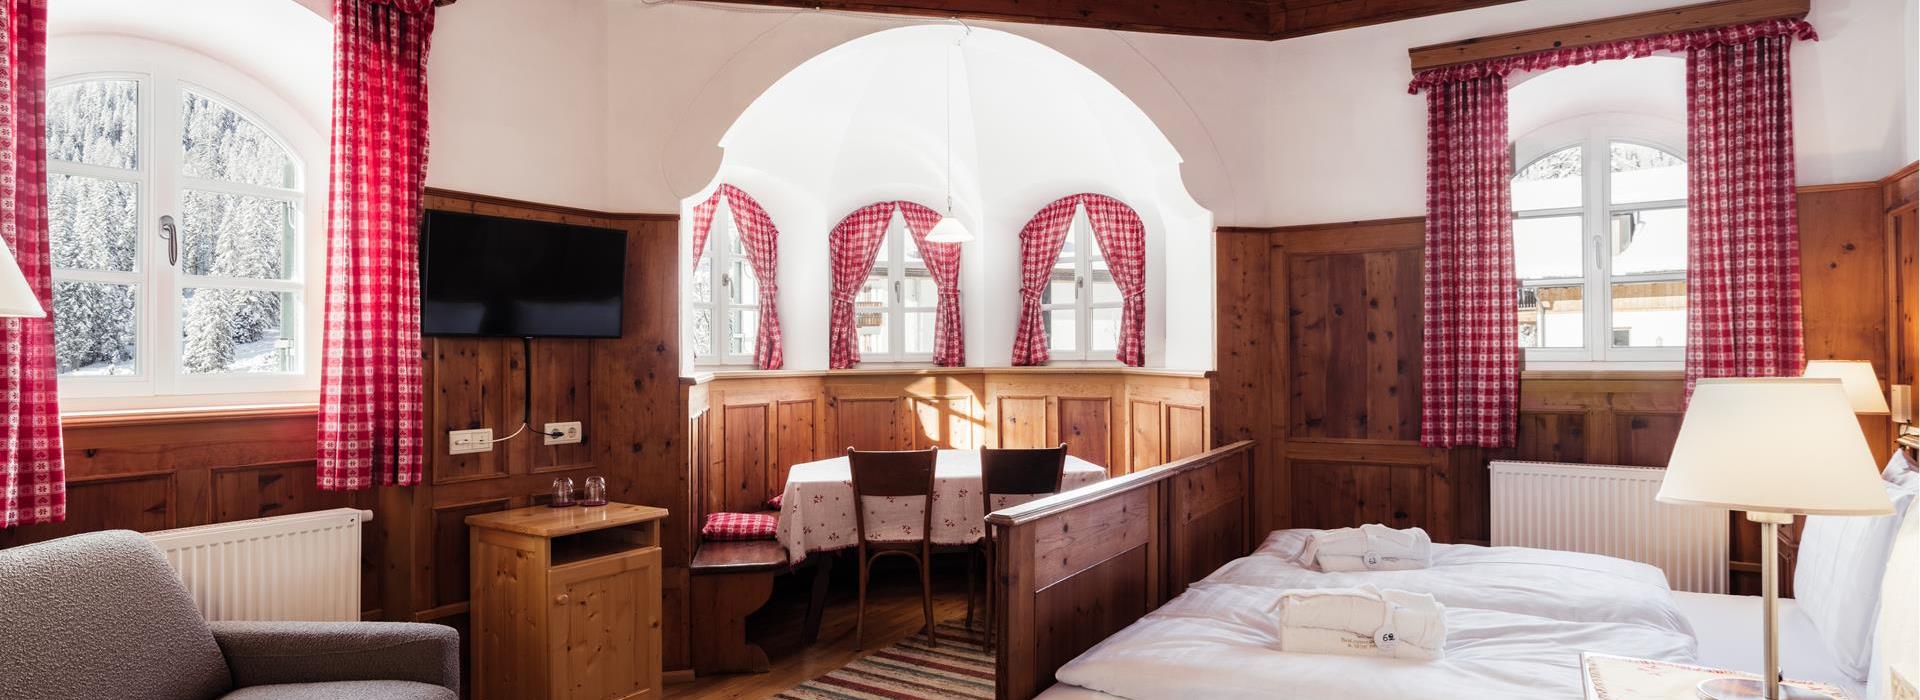 Romantic Room Chalet with double bed, living area and bay window